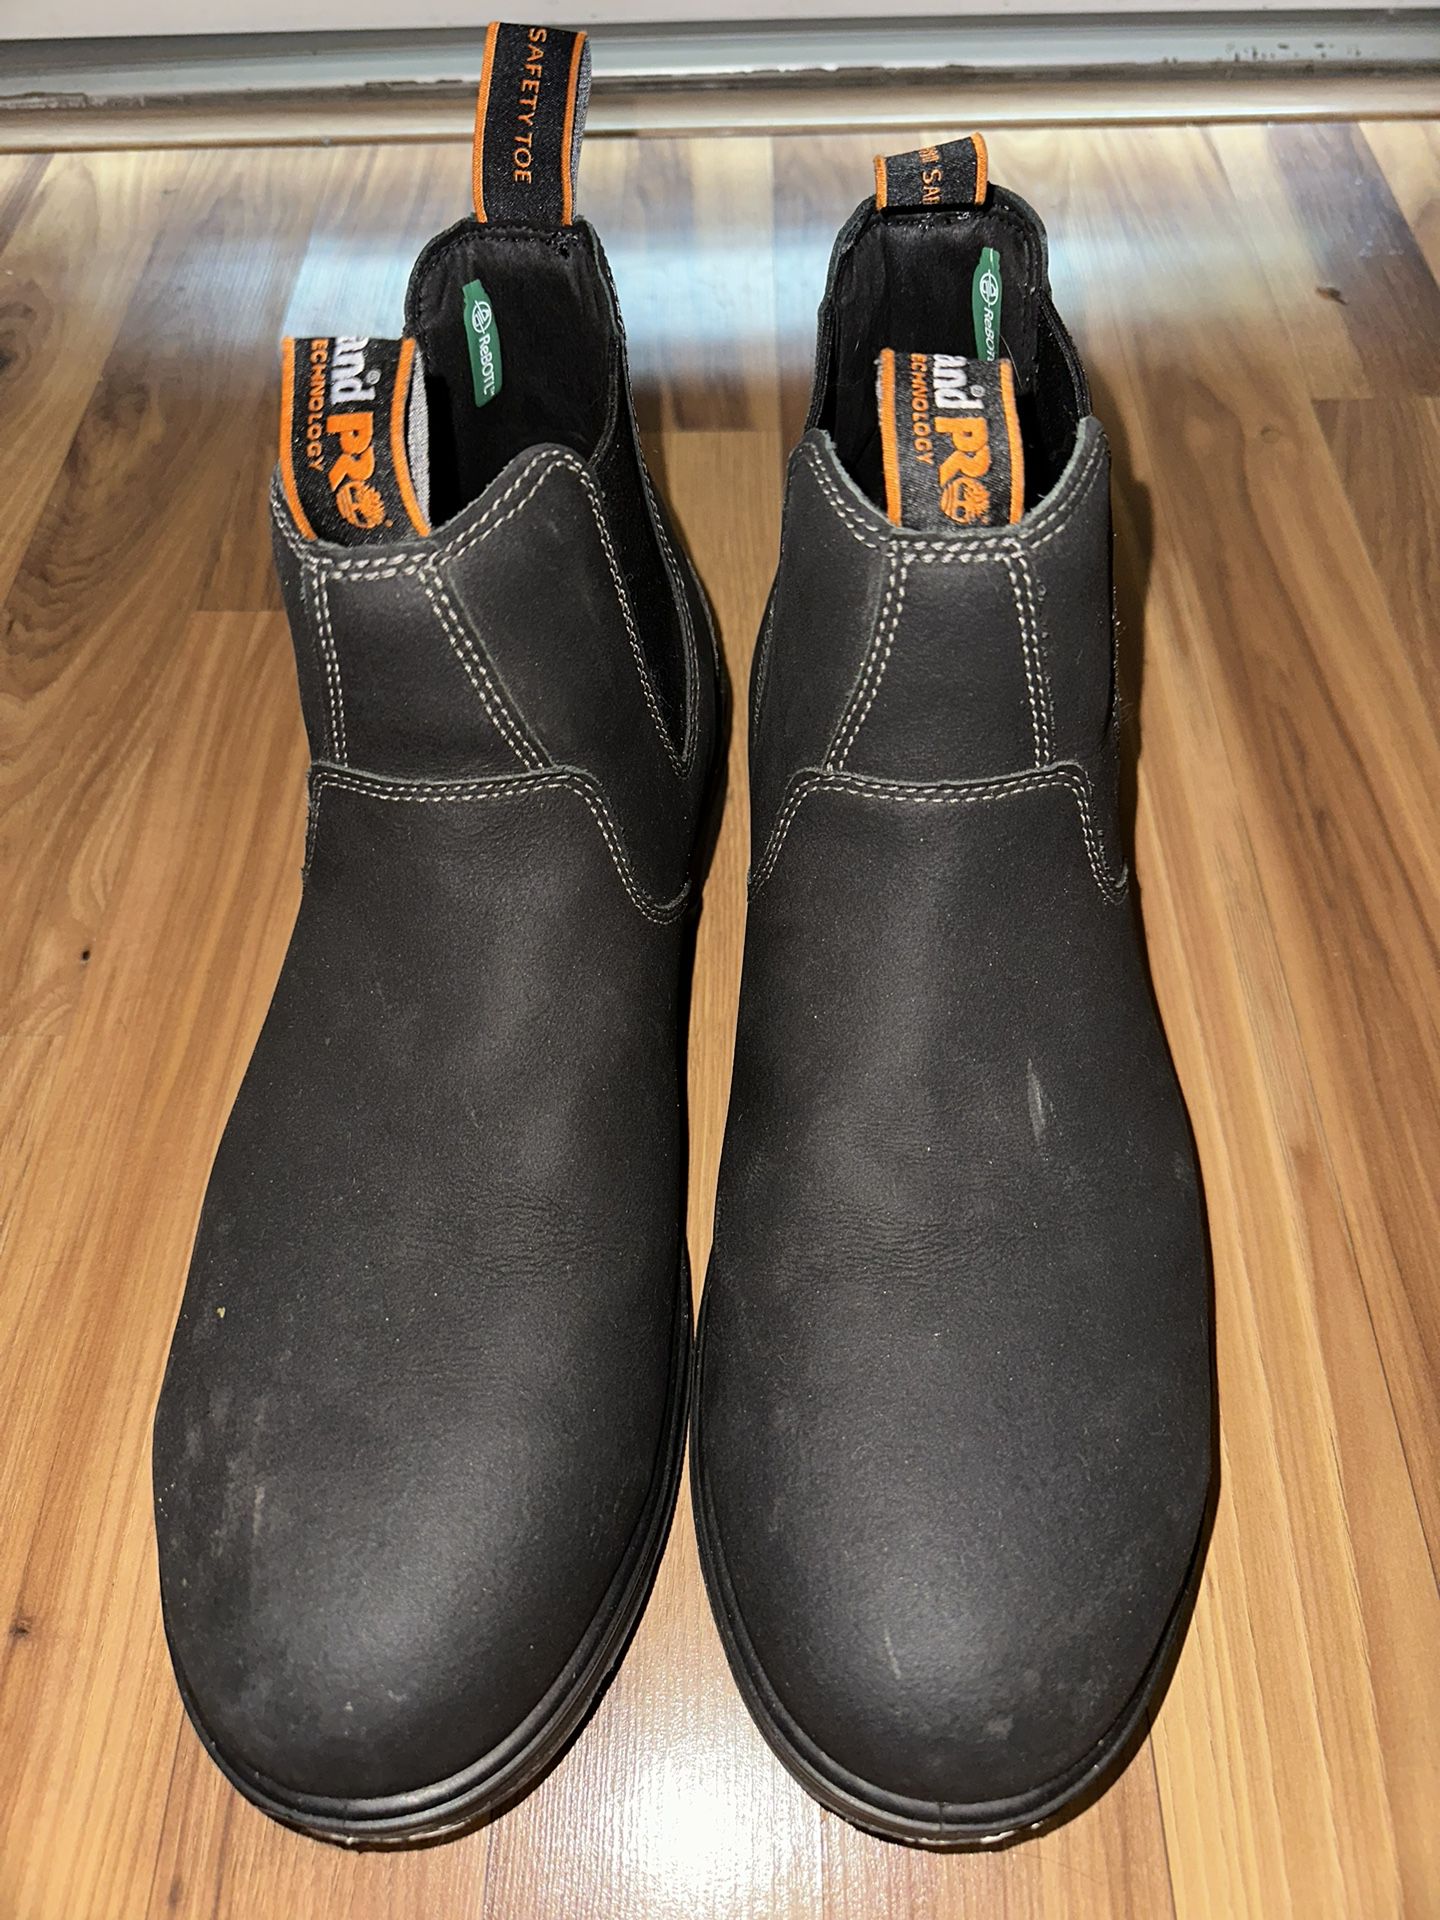 LIKE NEW Composite Toe Work Boots